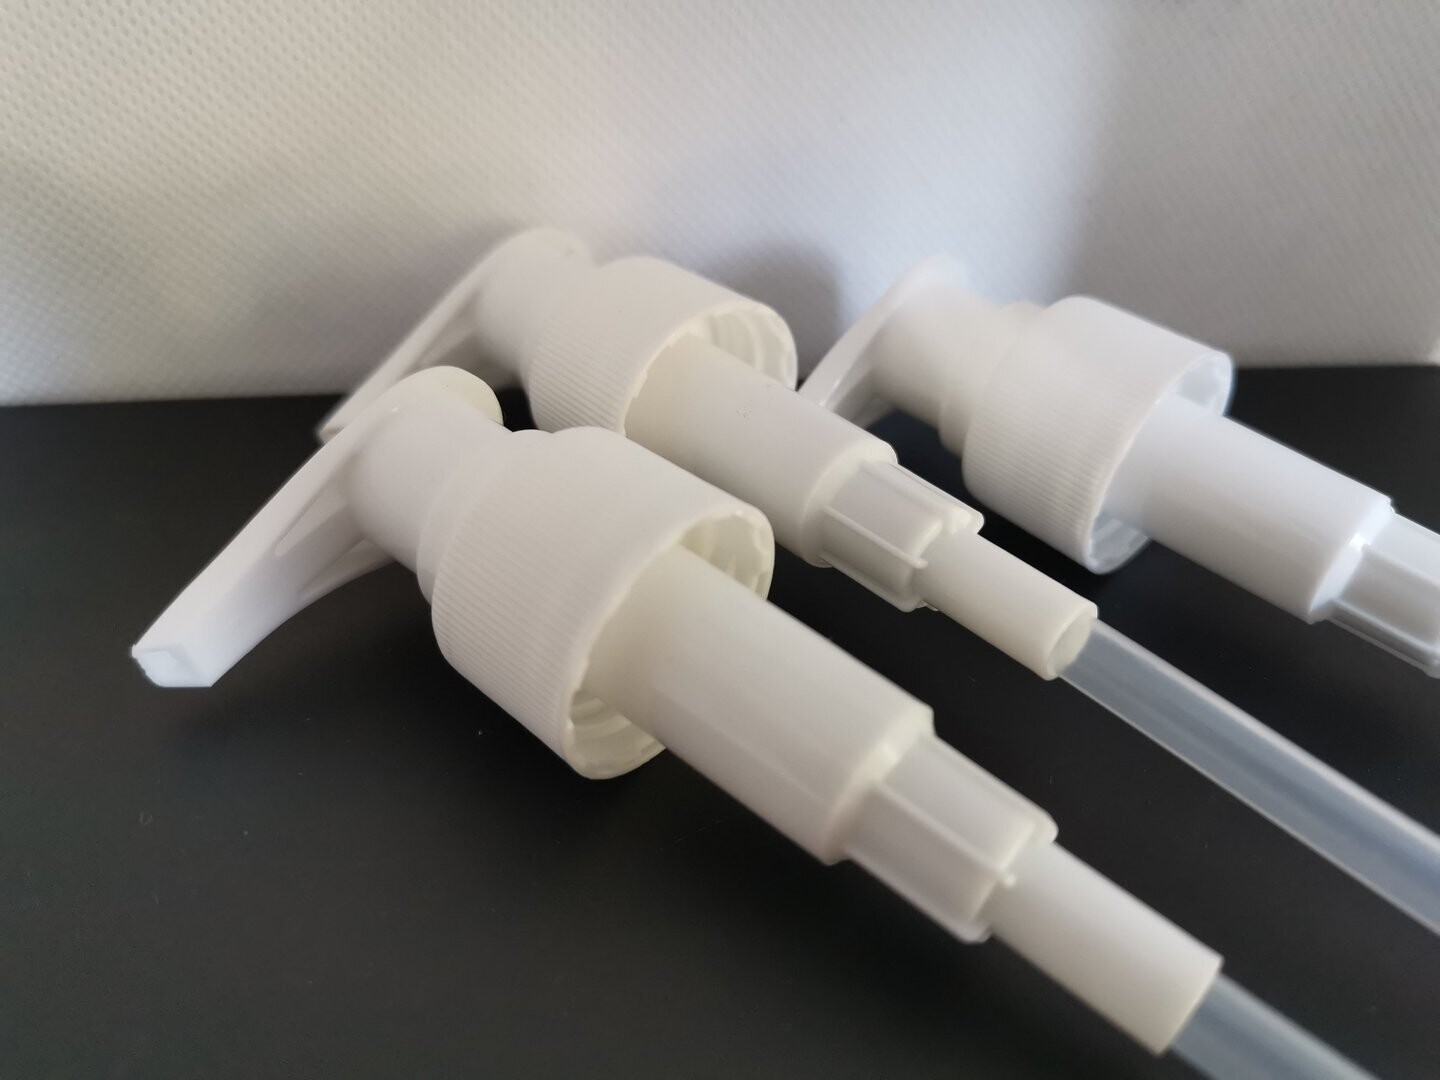 24mm WHITE (Ribbed) Lotion Pumps (24/410) 150mm Tube